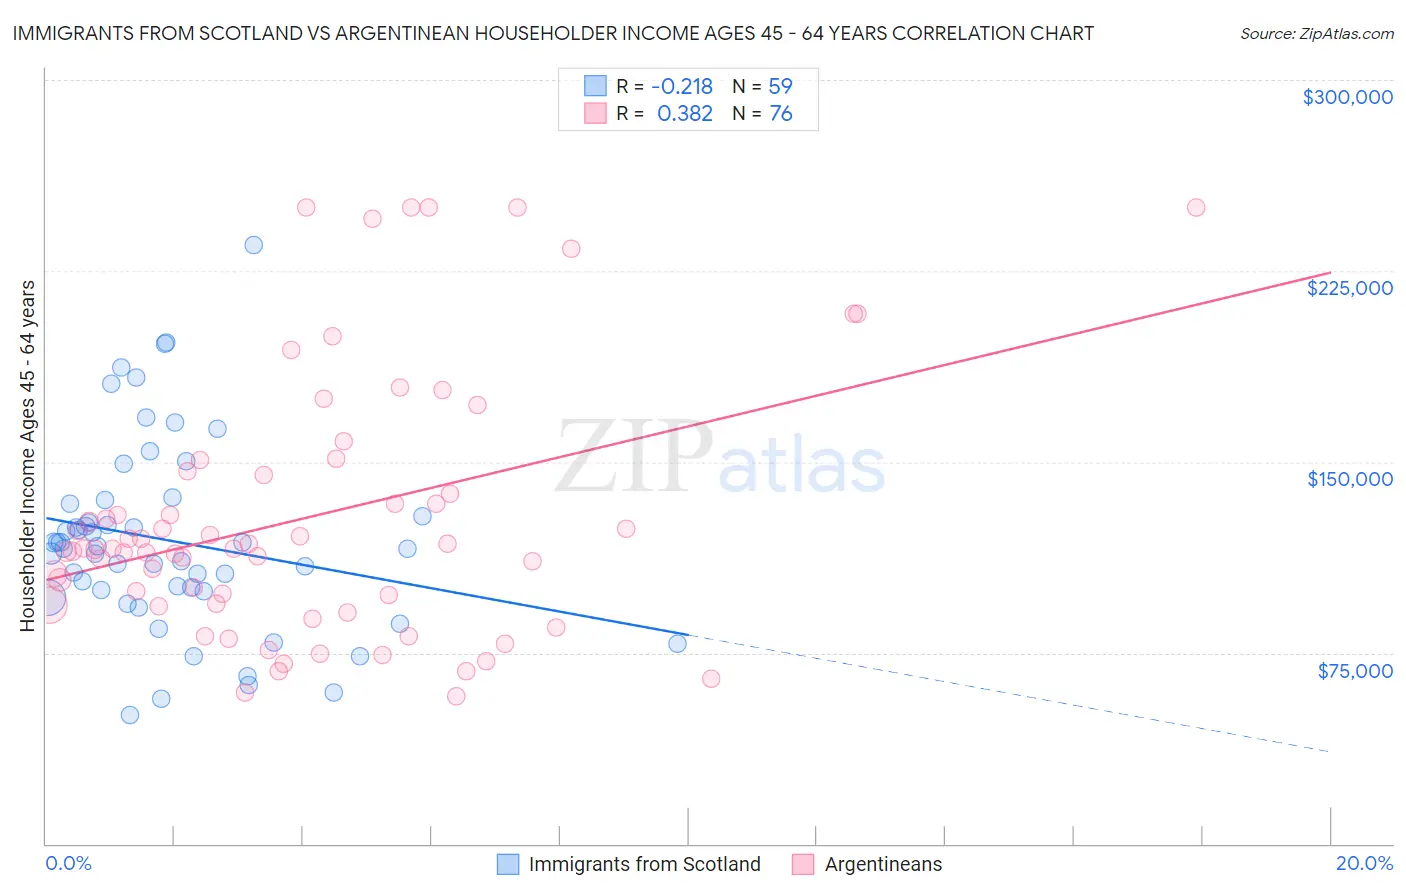 Immigrants from Scotland vs Argentinean Householder Income Ages 45 - 64 years